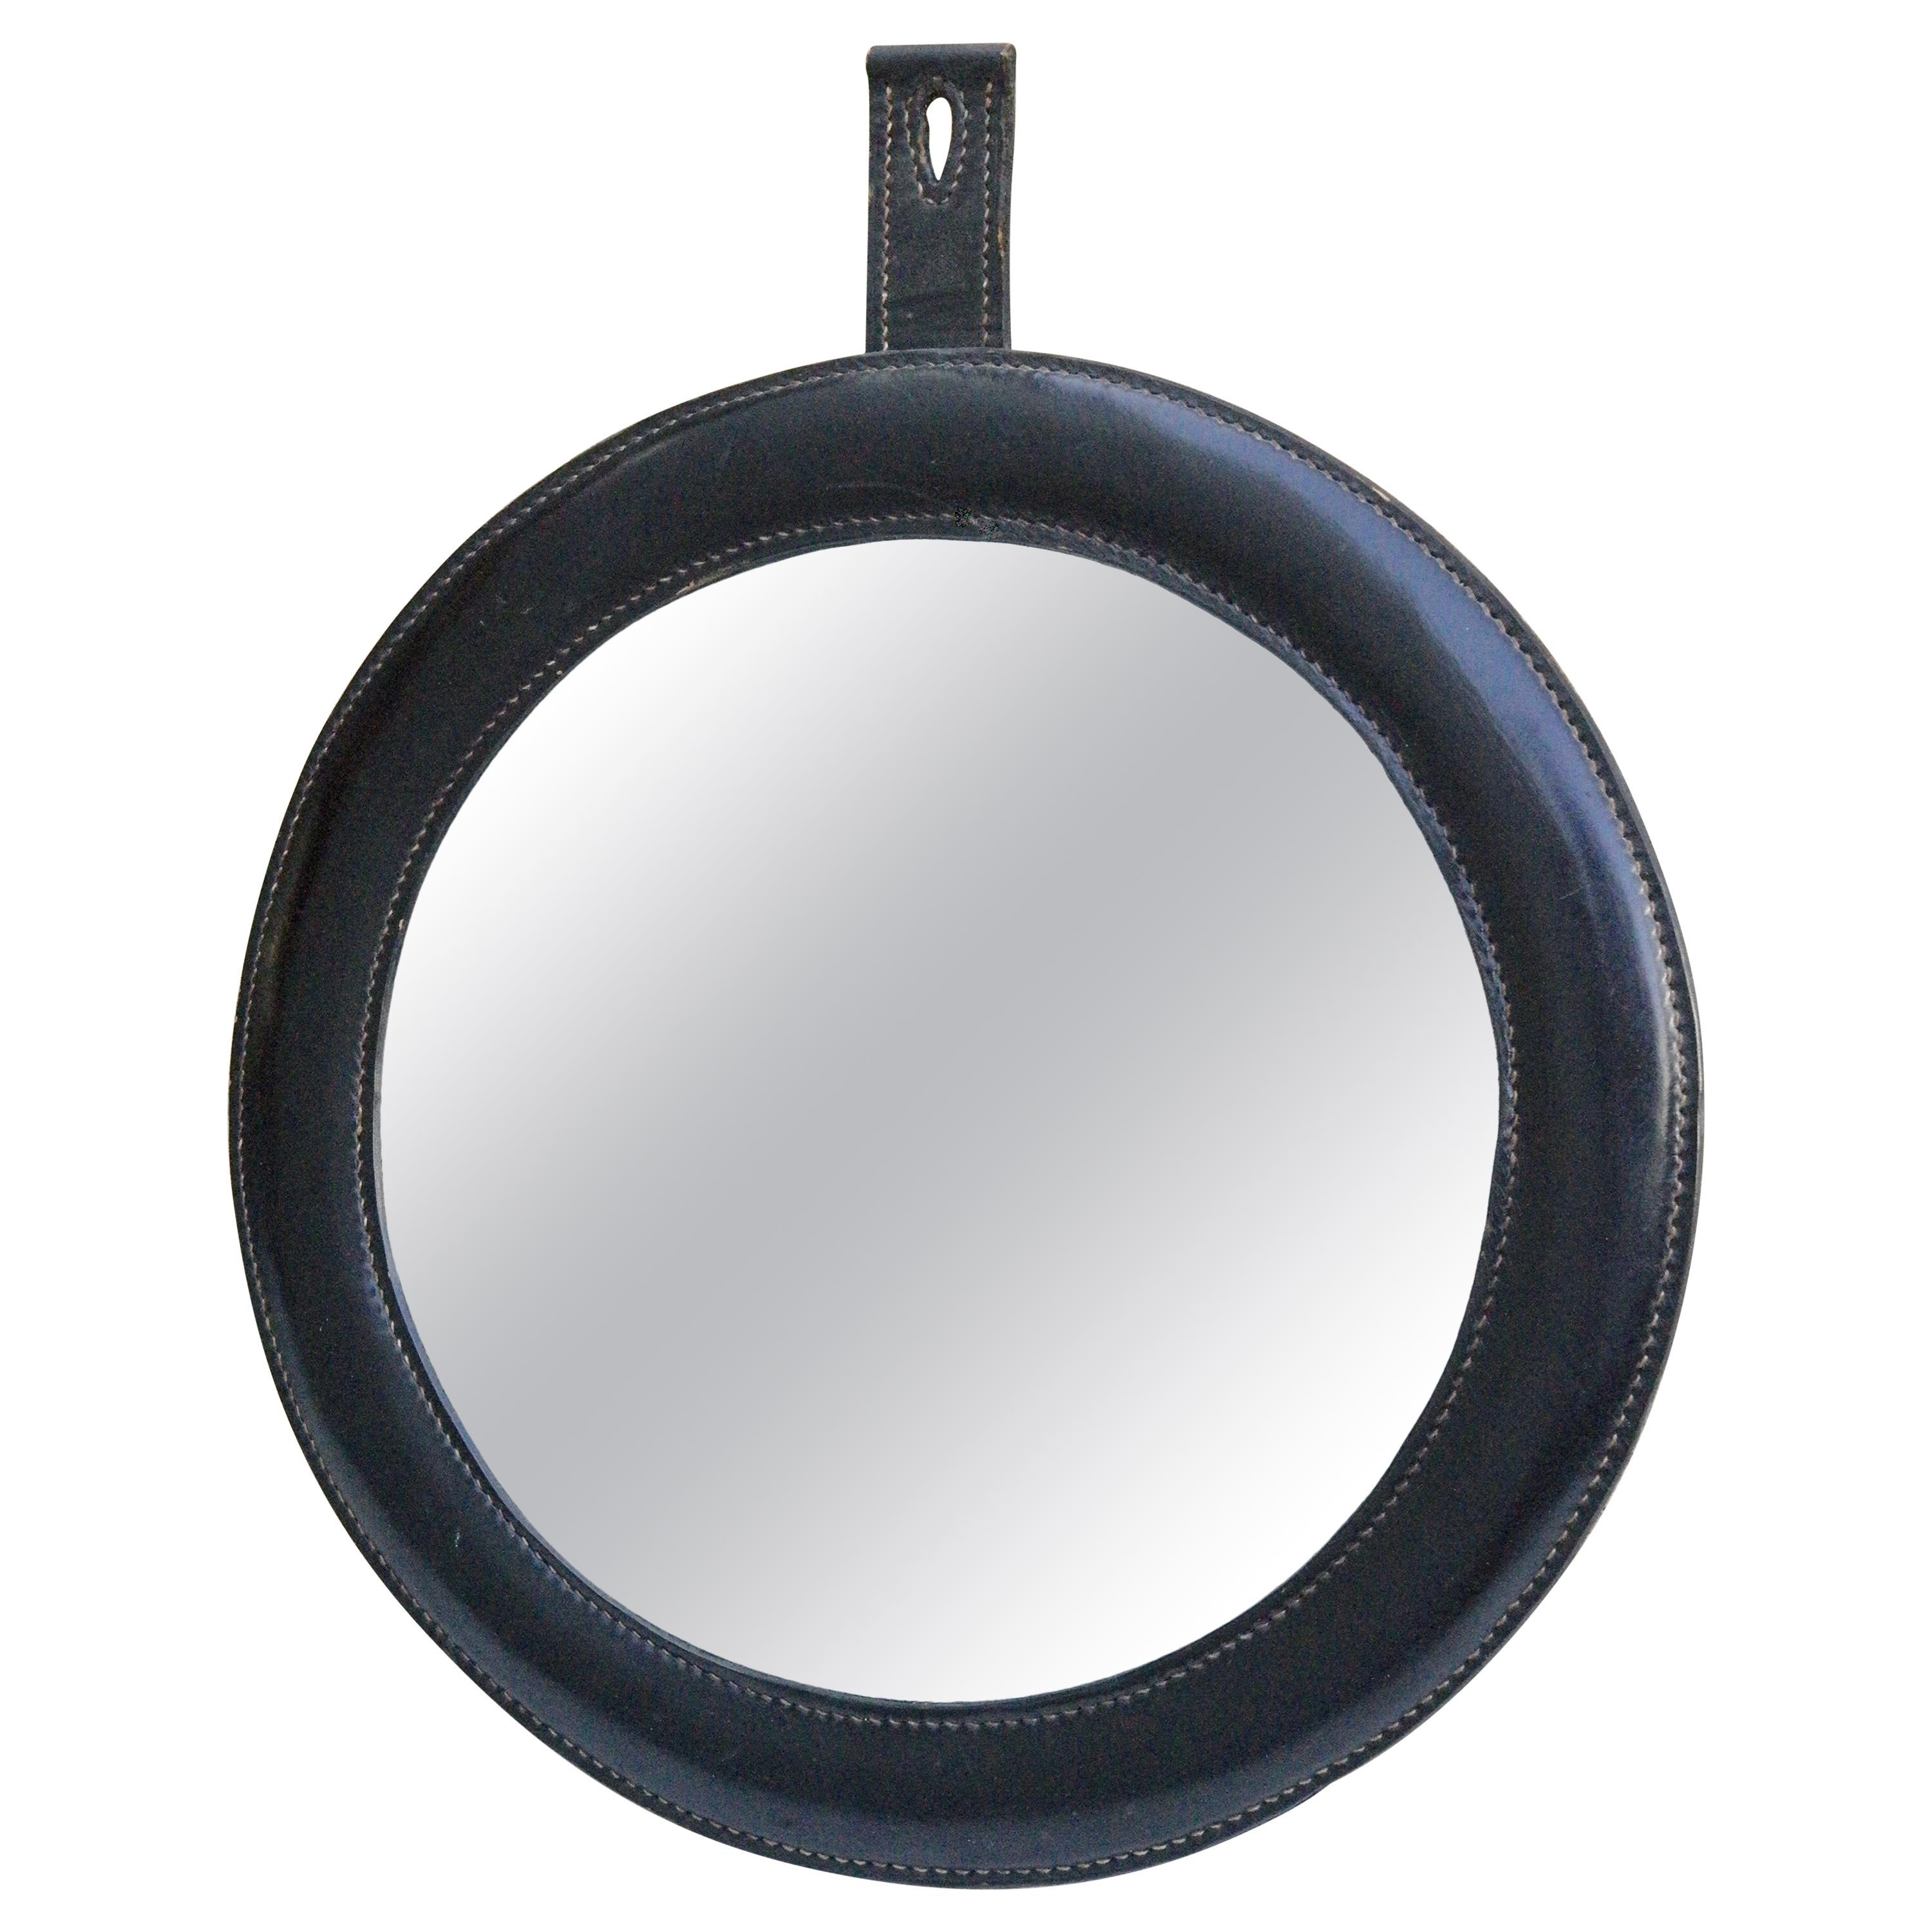 Hand-Stitched Black Leather Wall Mirror in Style of Jacques Adnet For Sale